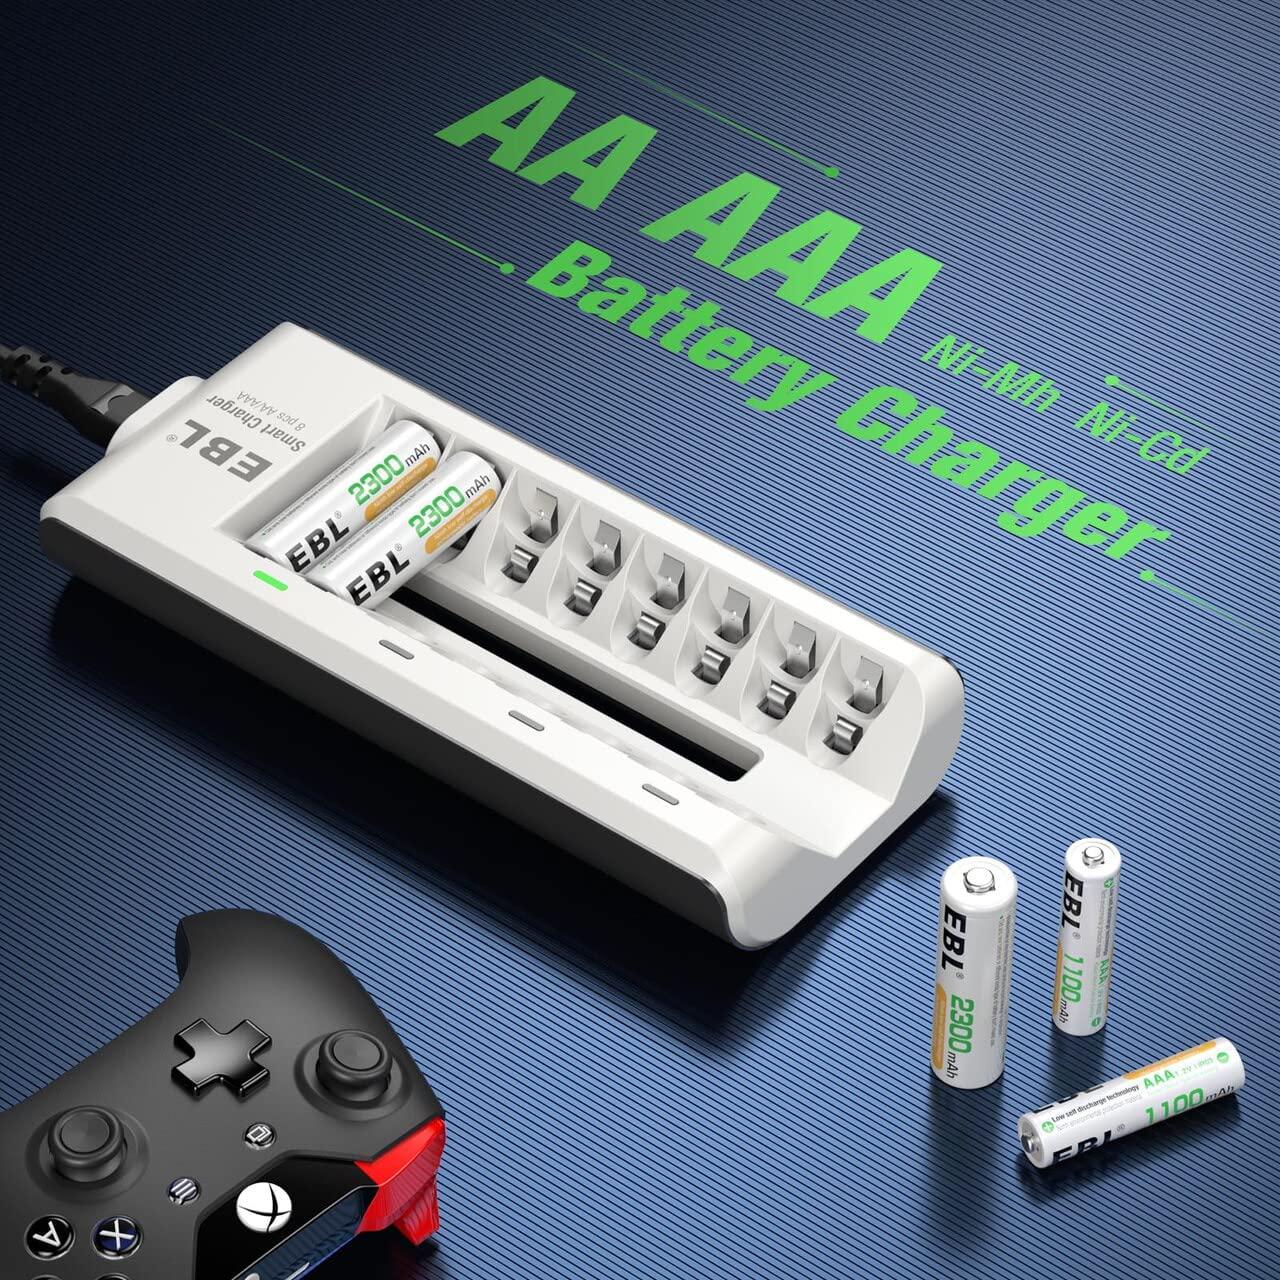 EBL, EBL 8 Bay Smart AA AAA Battery Charger and 8 pieces 2300mAh Ni-MH AA Rechargeable Batteries